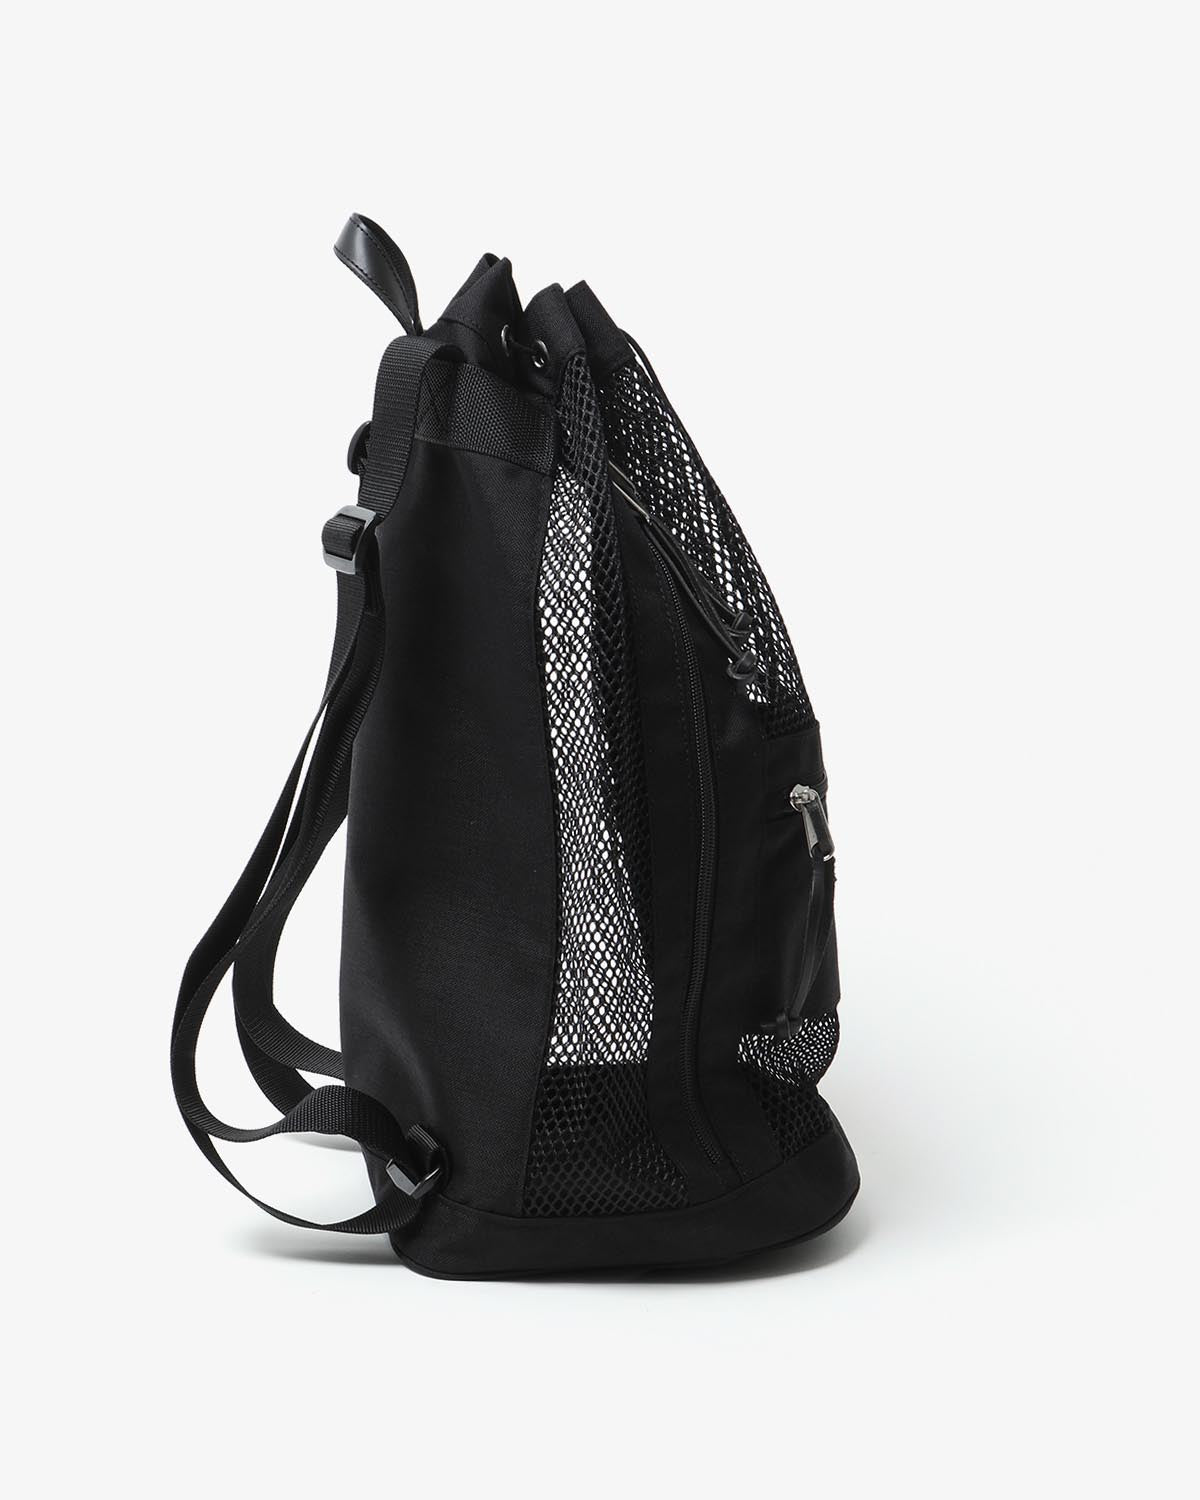 MESH SMALL BACKPACK MADE BY AETA